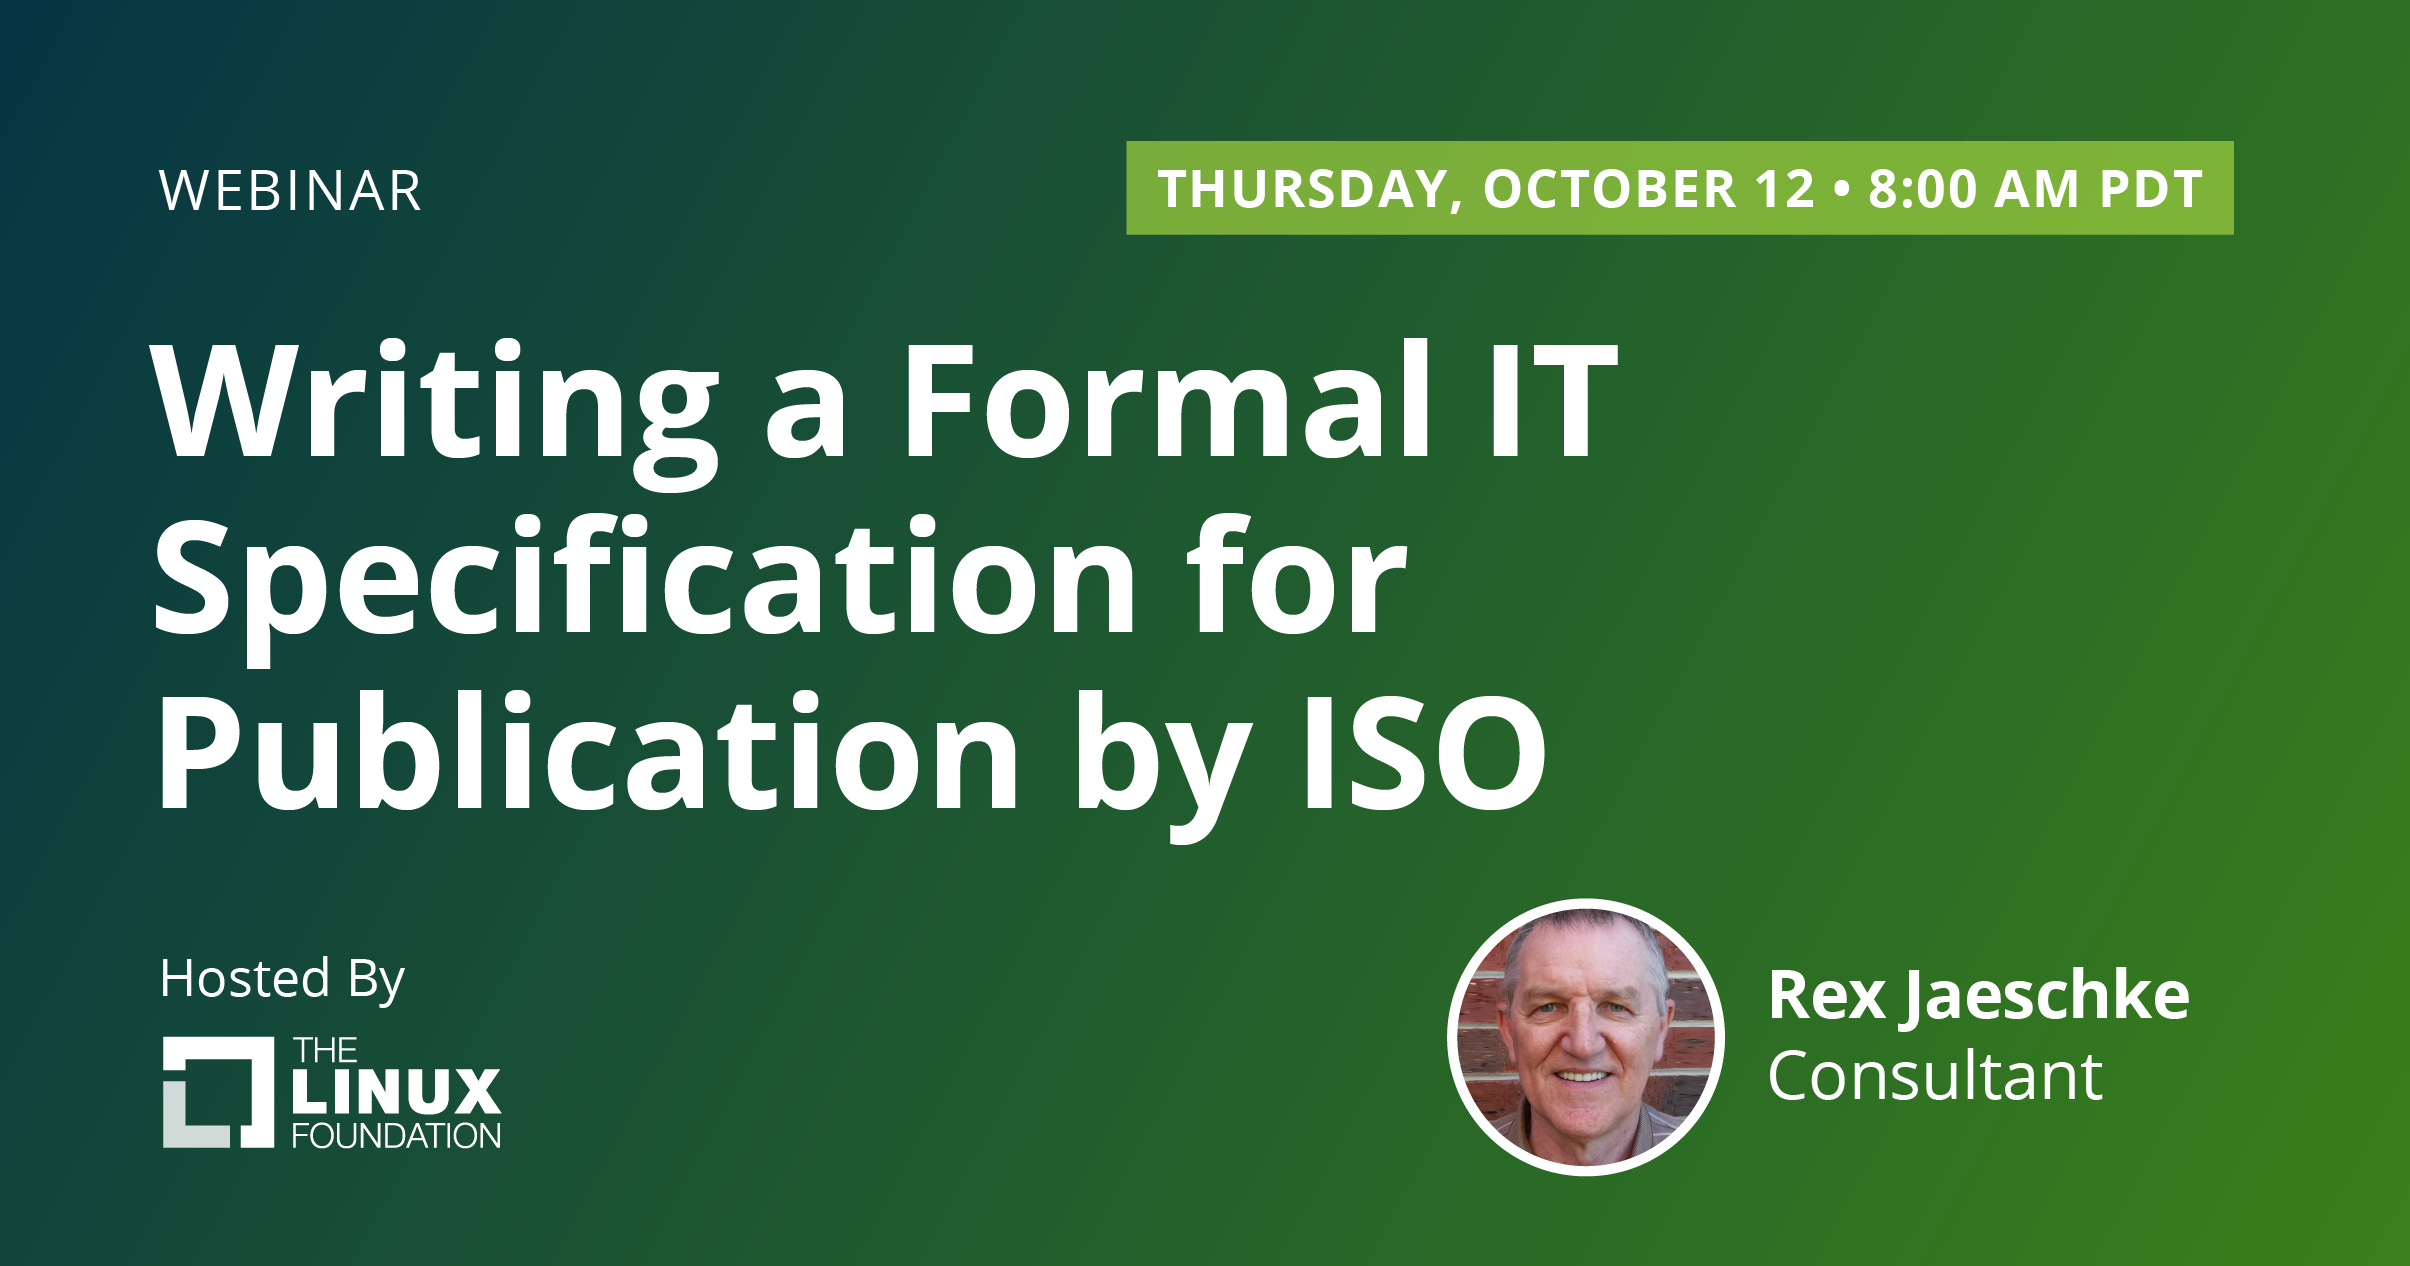 Writing a Formal IT Specification for Publication by ISO featured image